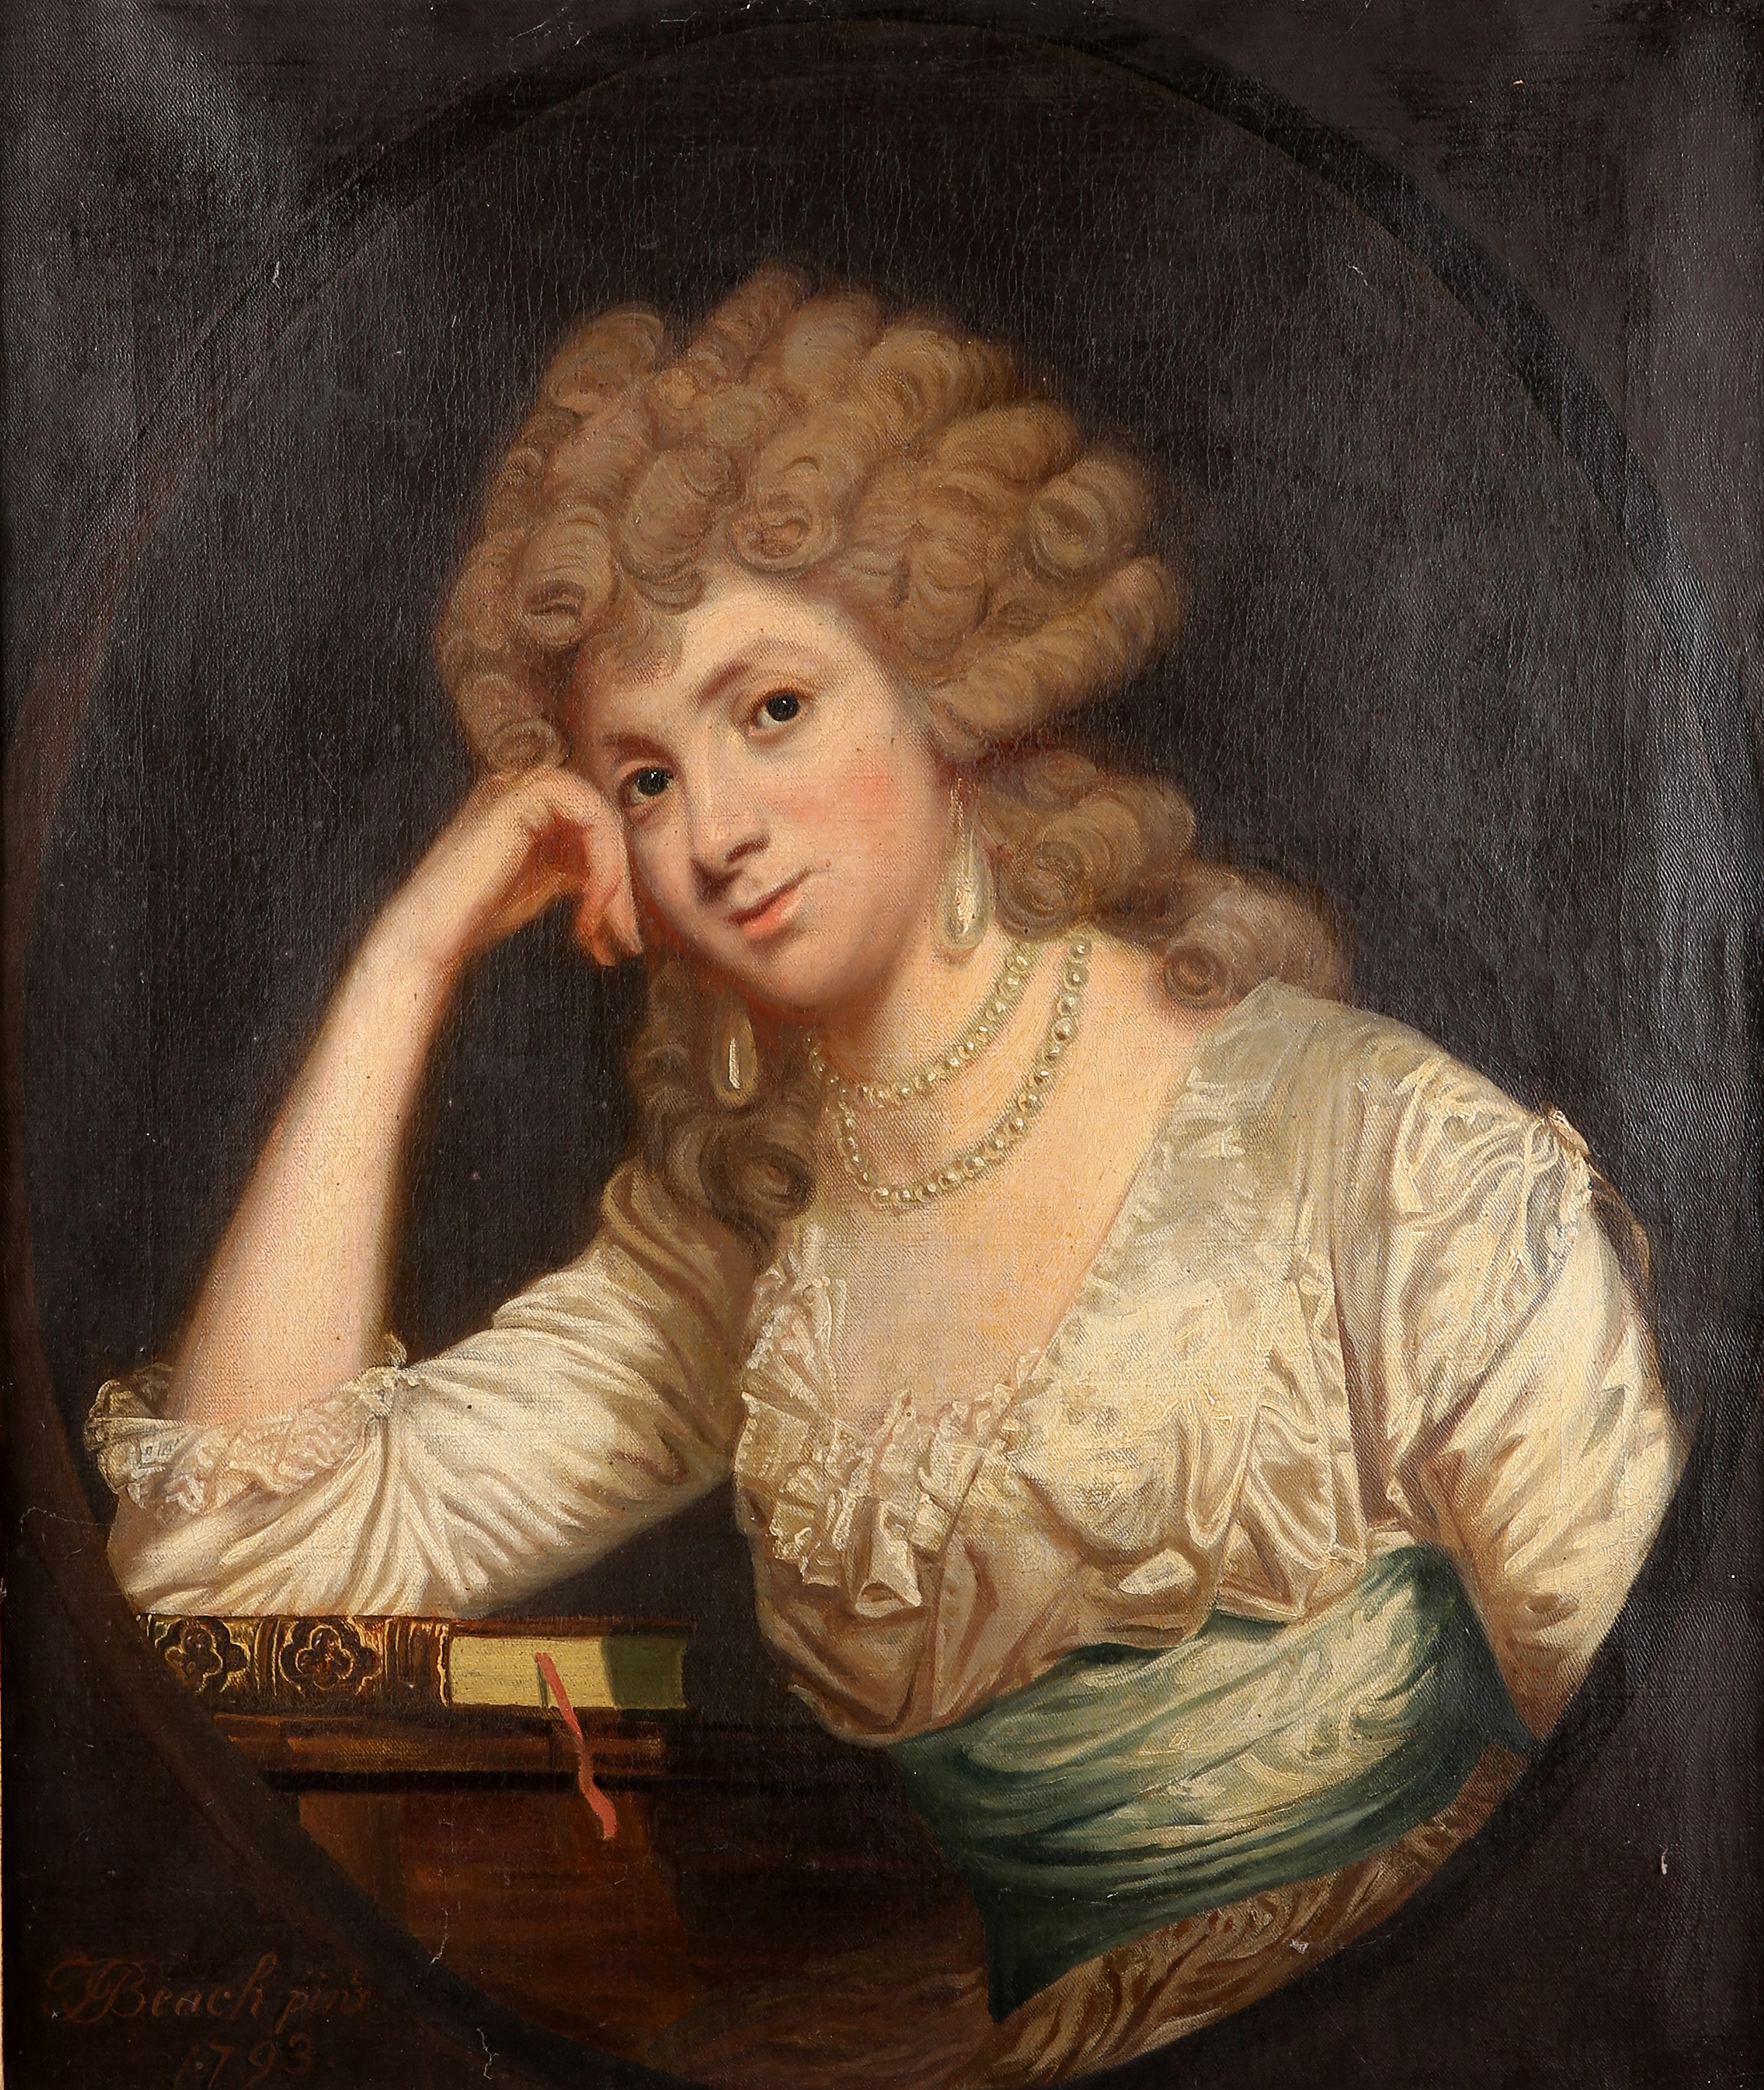 PORTRAIT OF AN ‘UNKNOWN’ LADY TURNS HEADS AT AUCTION